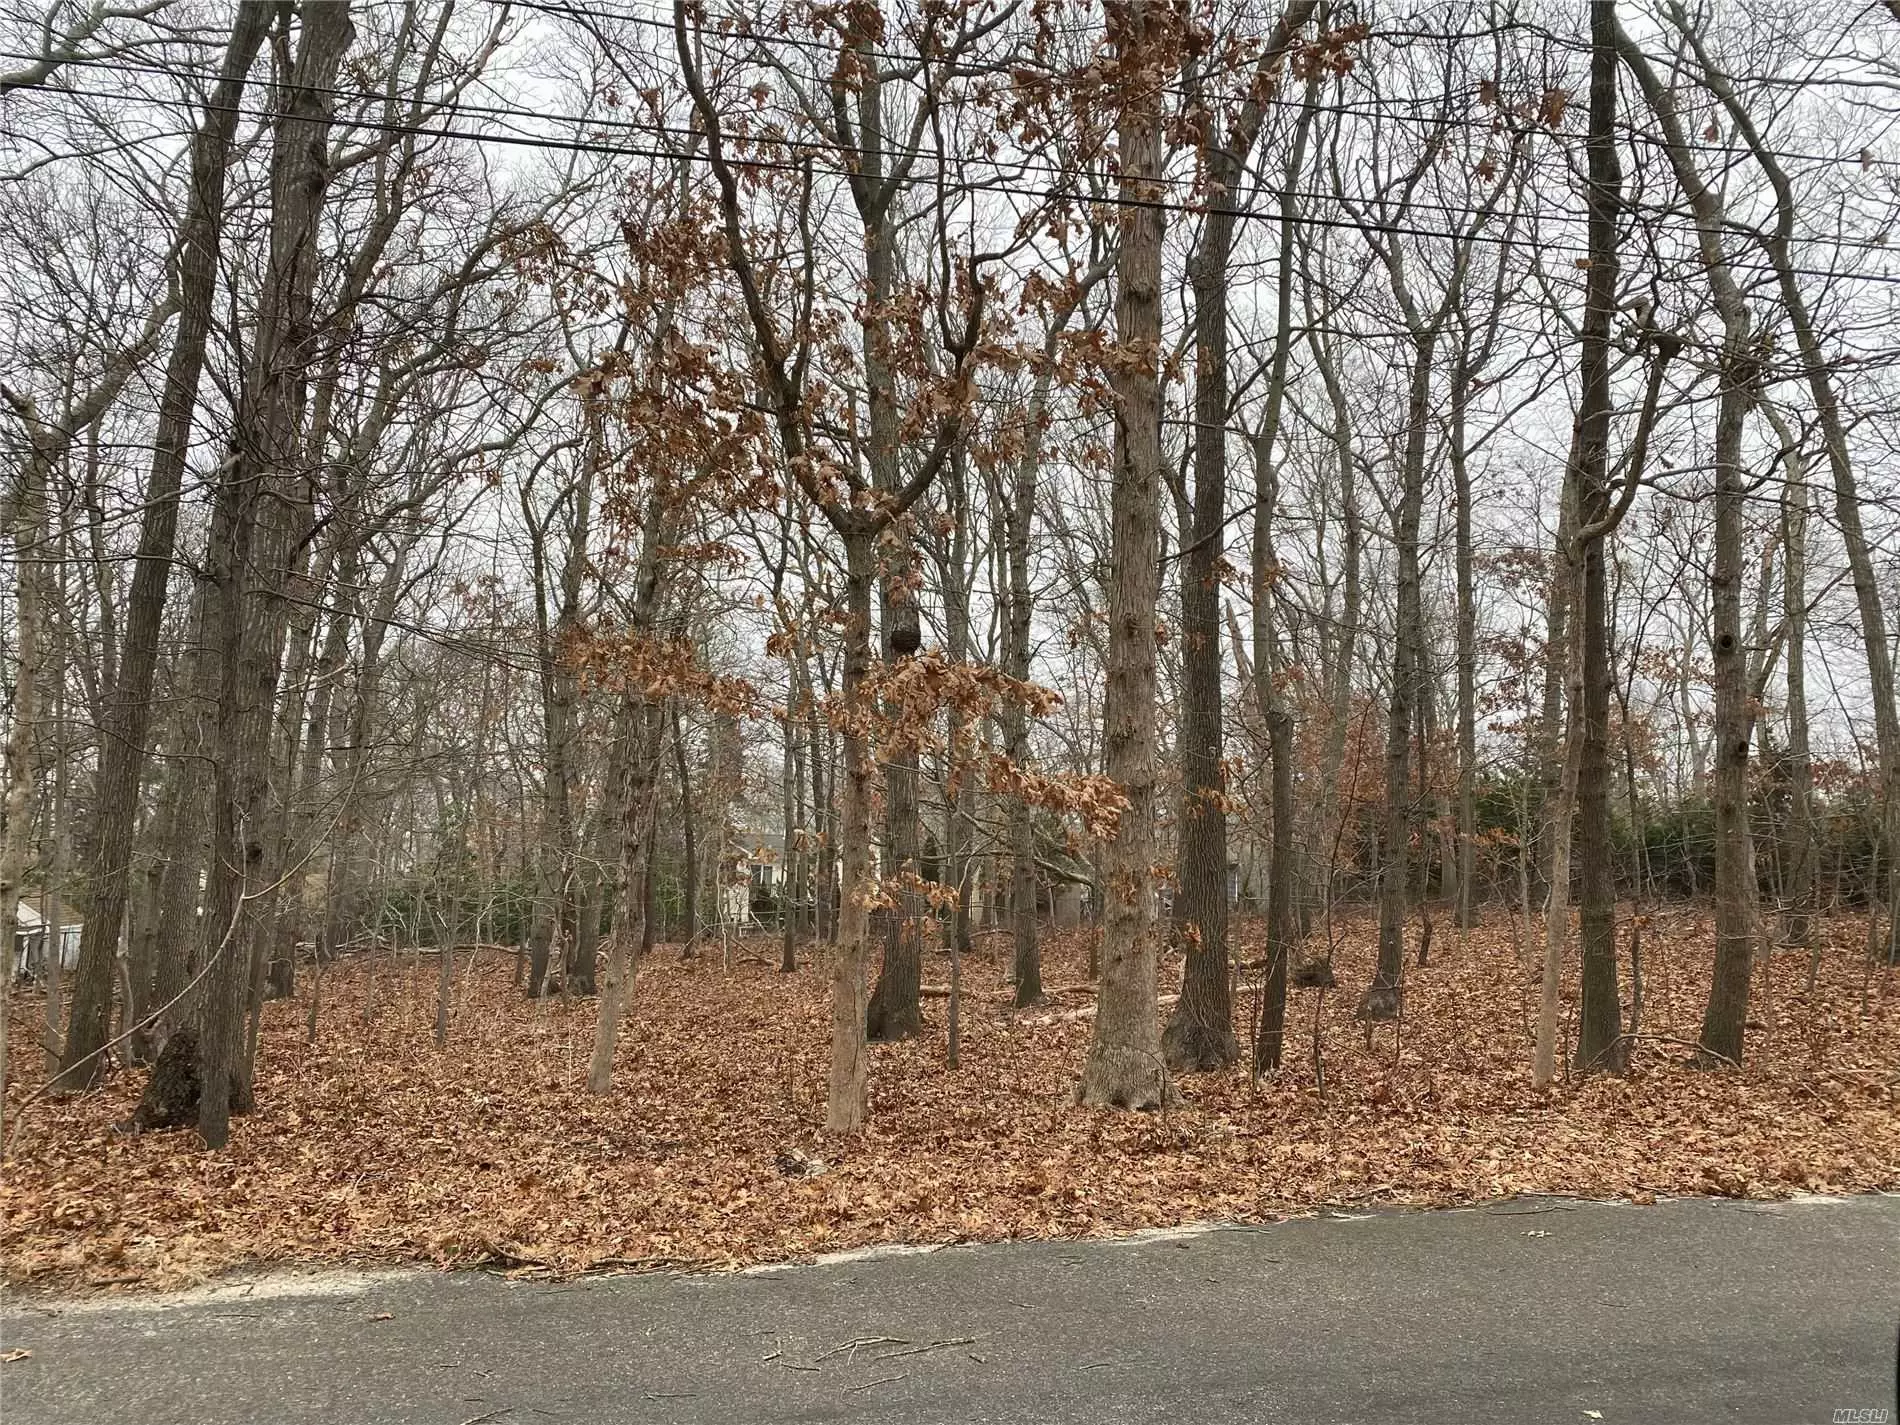 Location, location location! Superb builders lot in prime residential neighborhood/deeded beach rights. Close to Marina and Private Beaches - membership available. BUILD YOUR NORTH FORK DREAM HOUSE - Owner hold approved plans from the Town of Southold for a 2800 sq.ft House, 2 car garage & 18&rsquo;x36&rsquo; Pool. Suffolk County H.D Sanitary permit. Prime residential builders lot. Access to Bay Beaches and Marina just steps away. Peconic Tax Applies. All must be verified